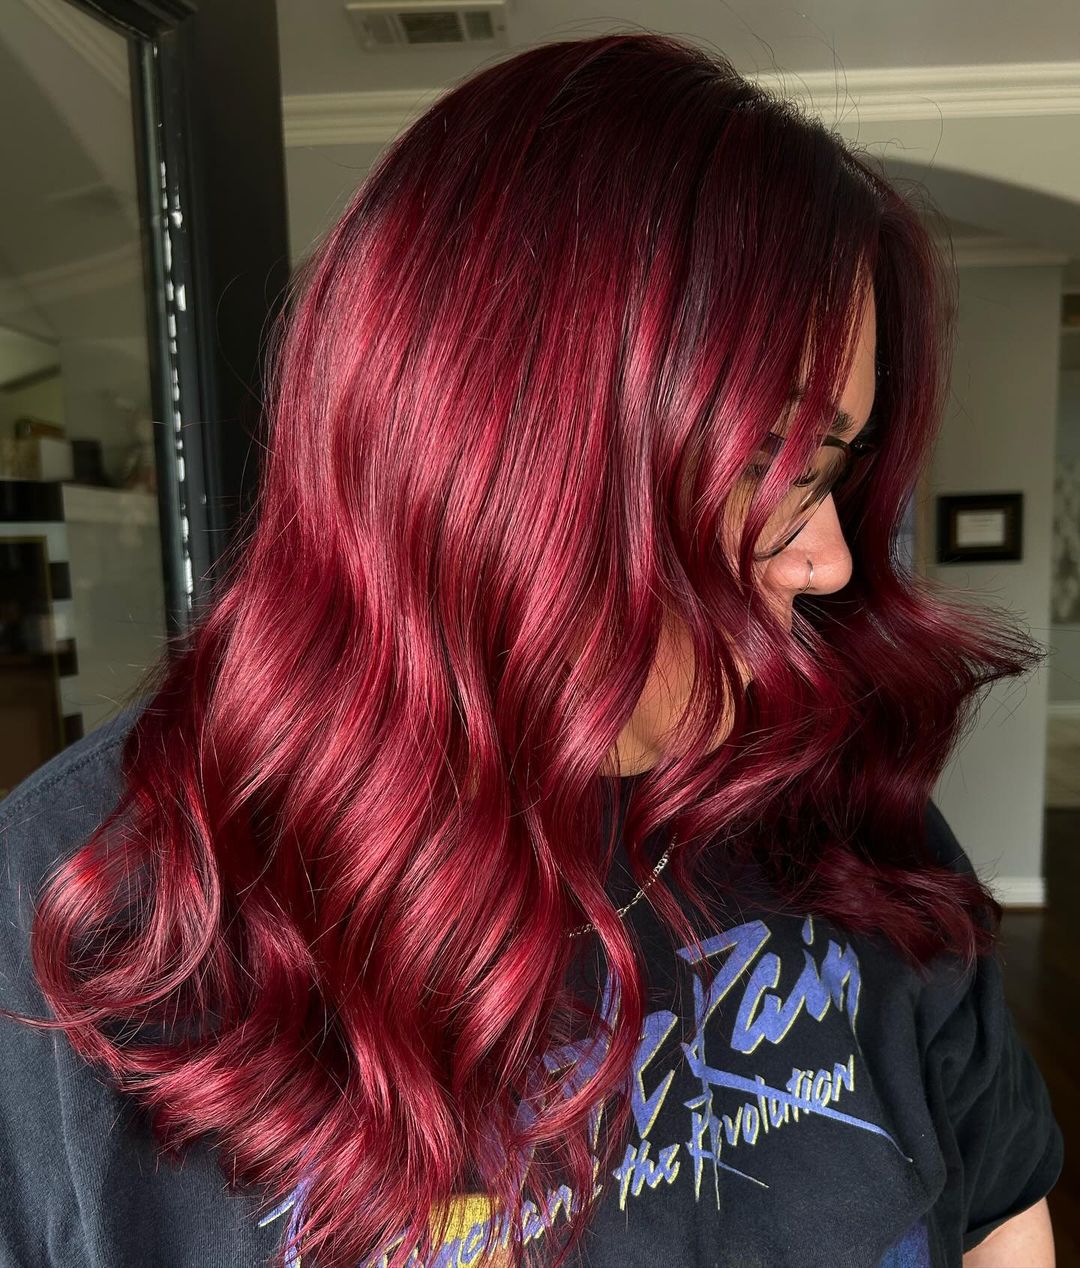 curled ruby red hair